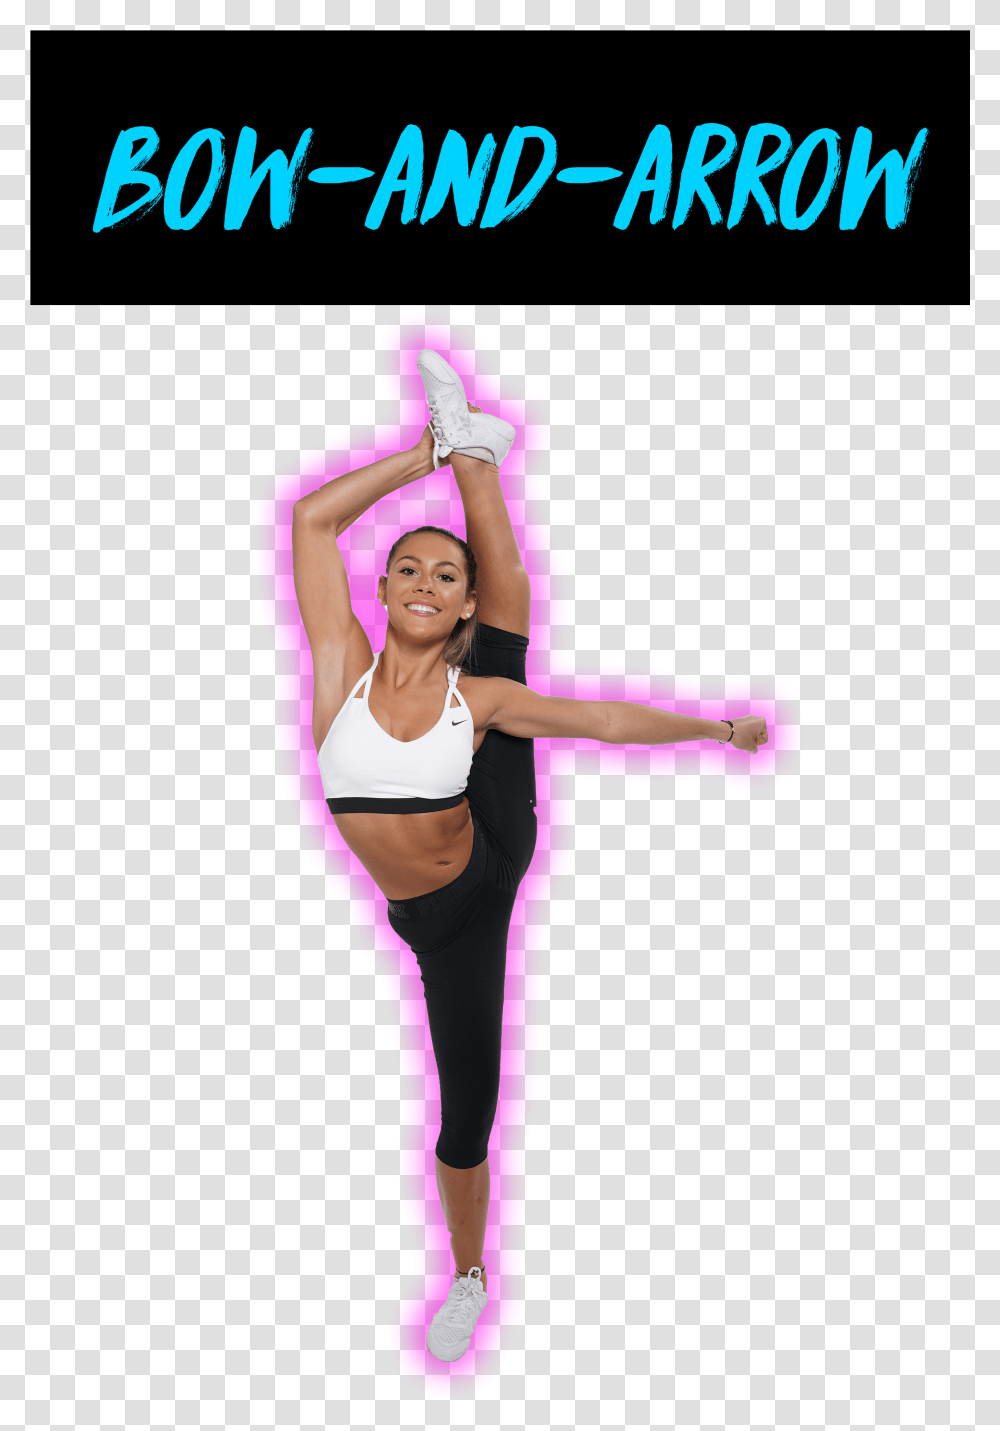 Bow And Arrow Stunt Cheerleading Flyer Poses, Person, Human, Acrobatic, Female Transparent Png